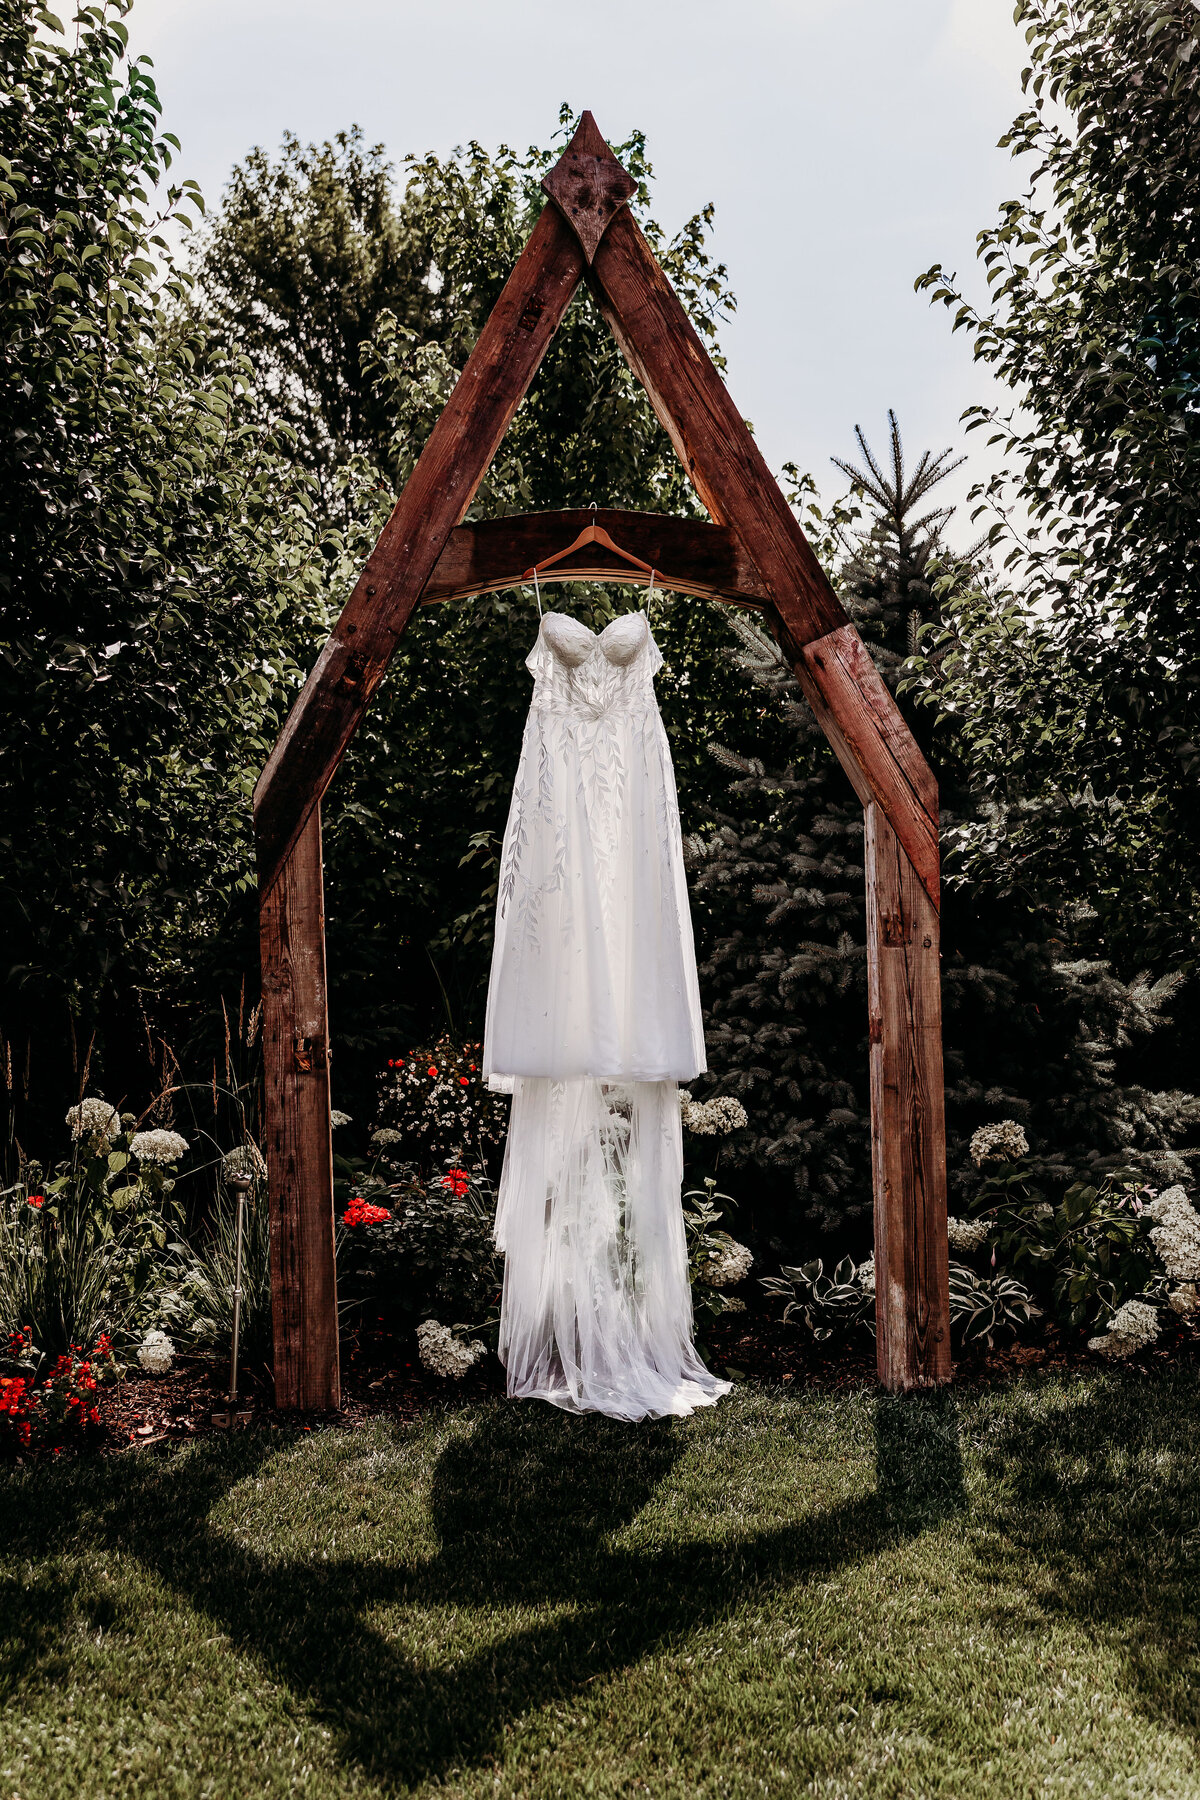 A wedding gown on display.